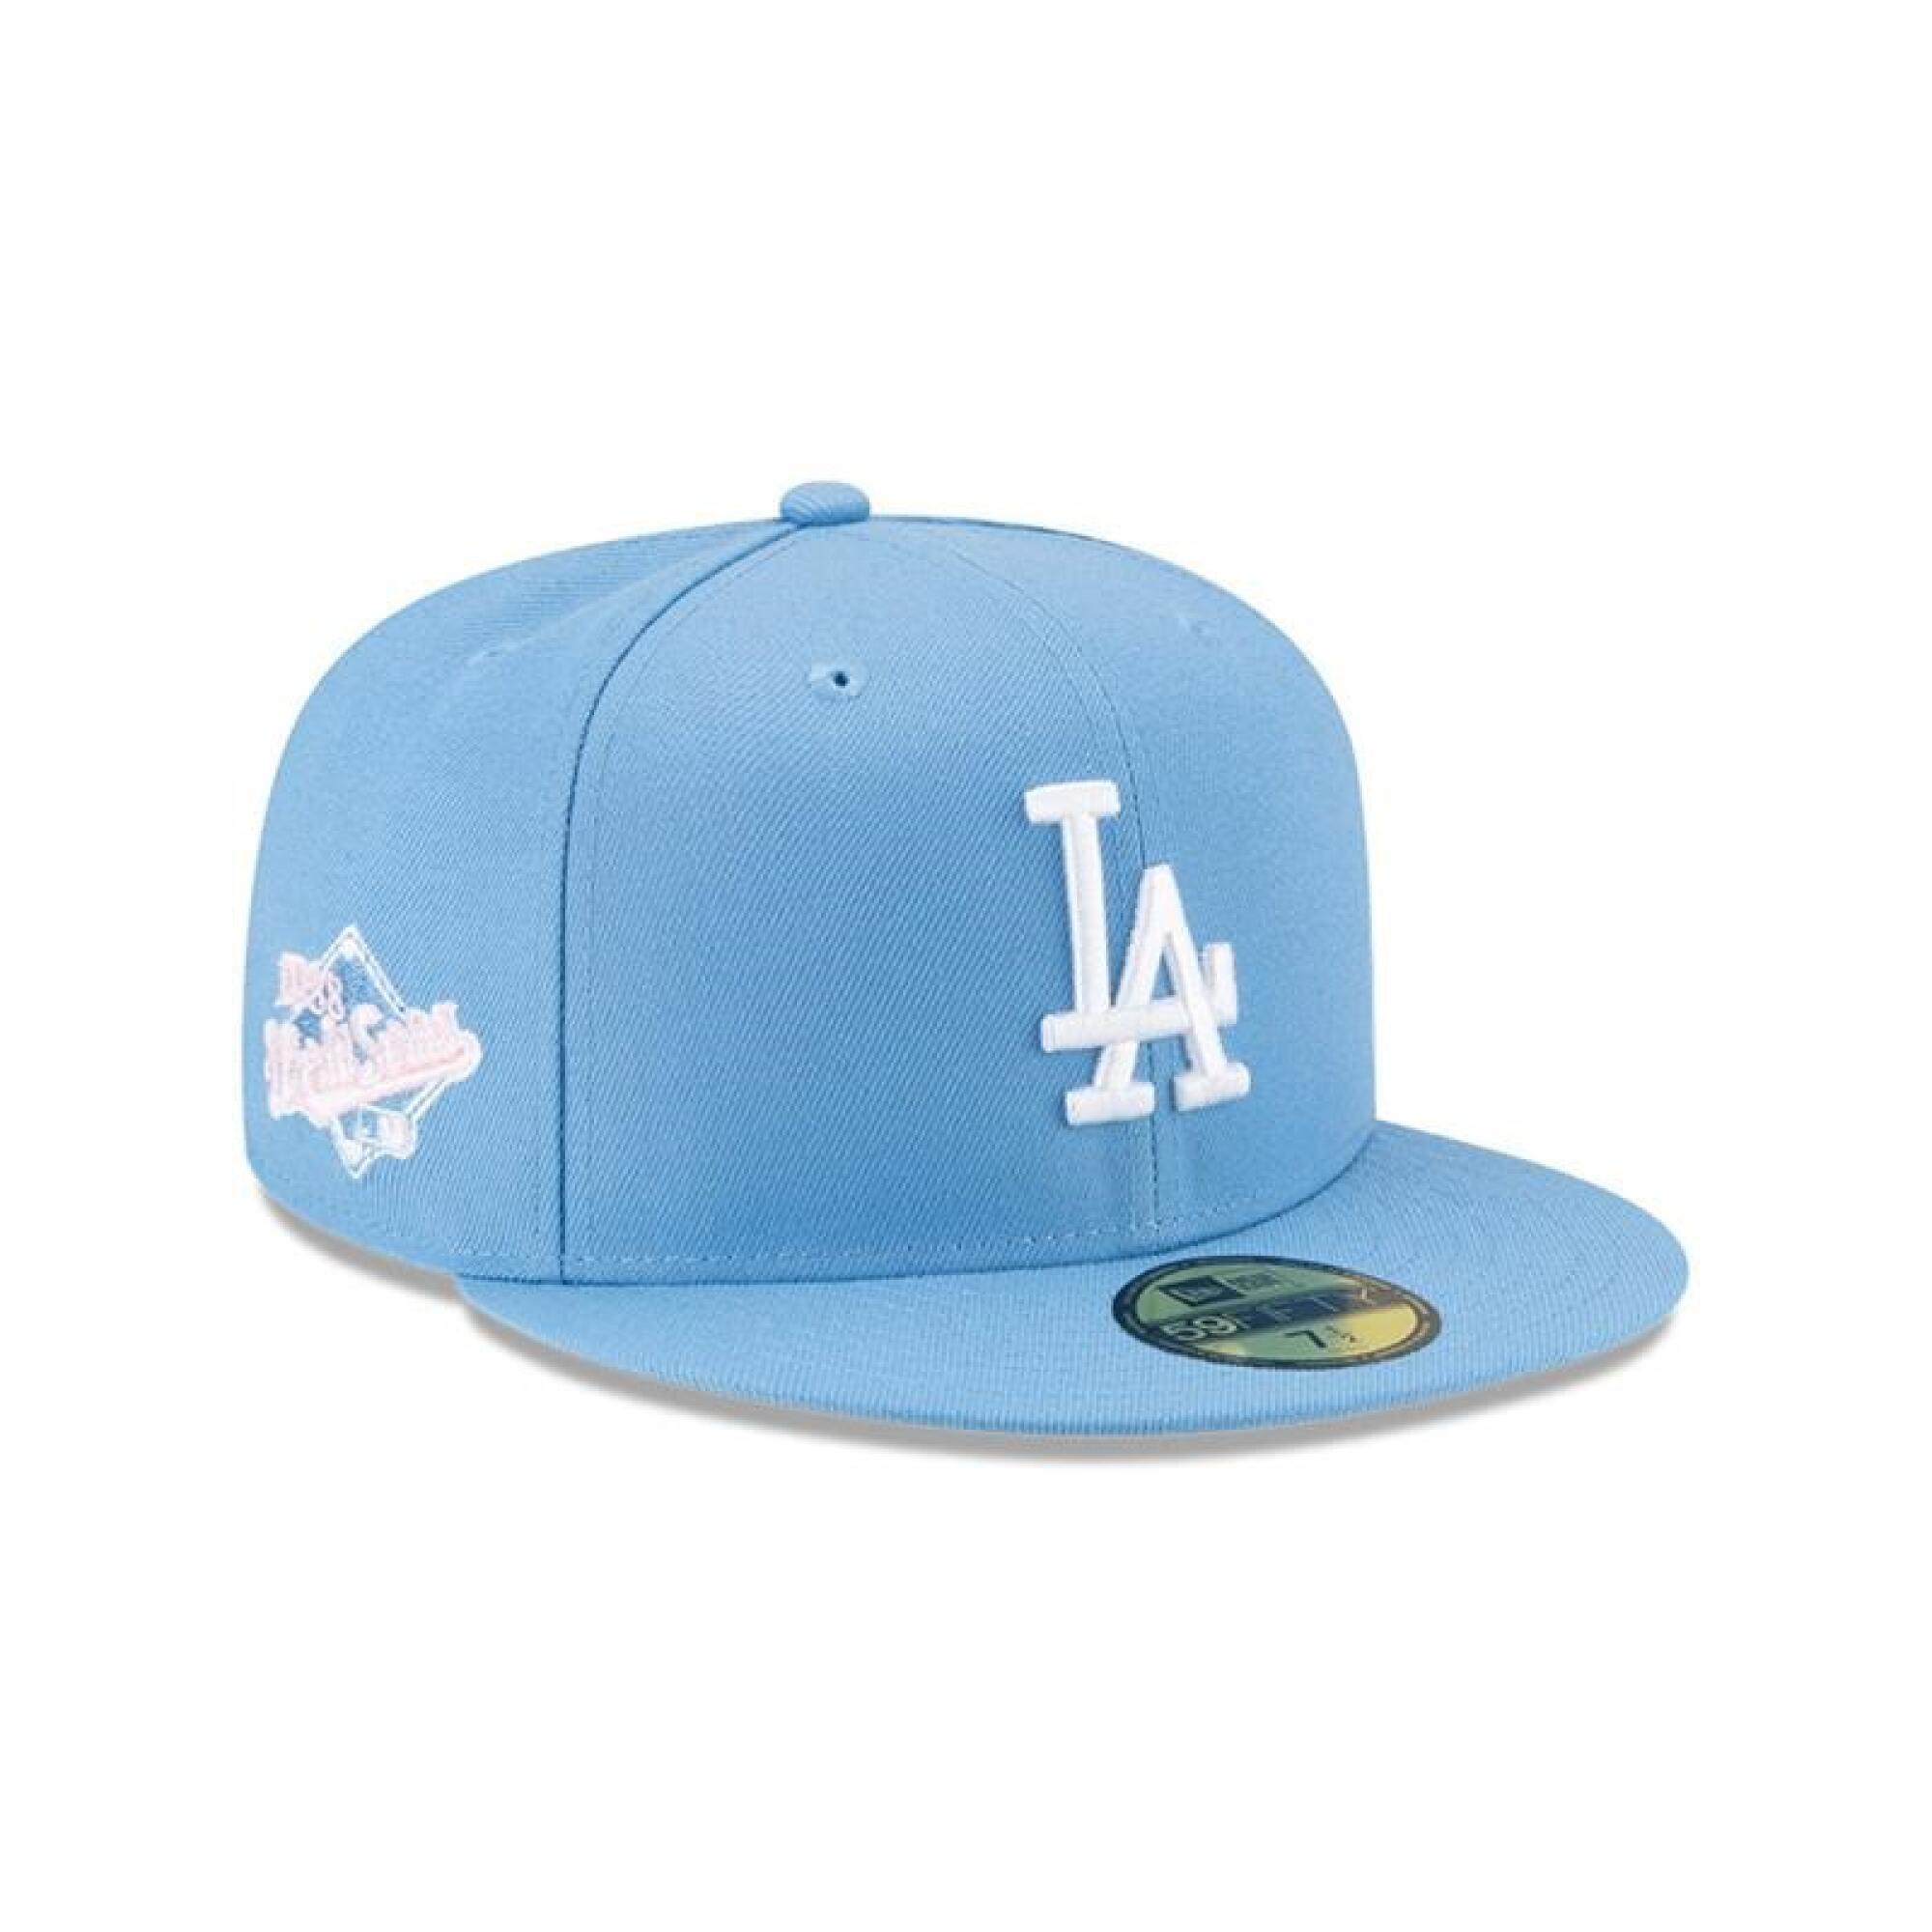 The "Color UV 59Fifty" was the most popular Dodgers fashion cap in 2021.